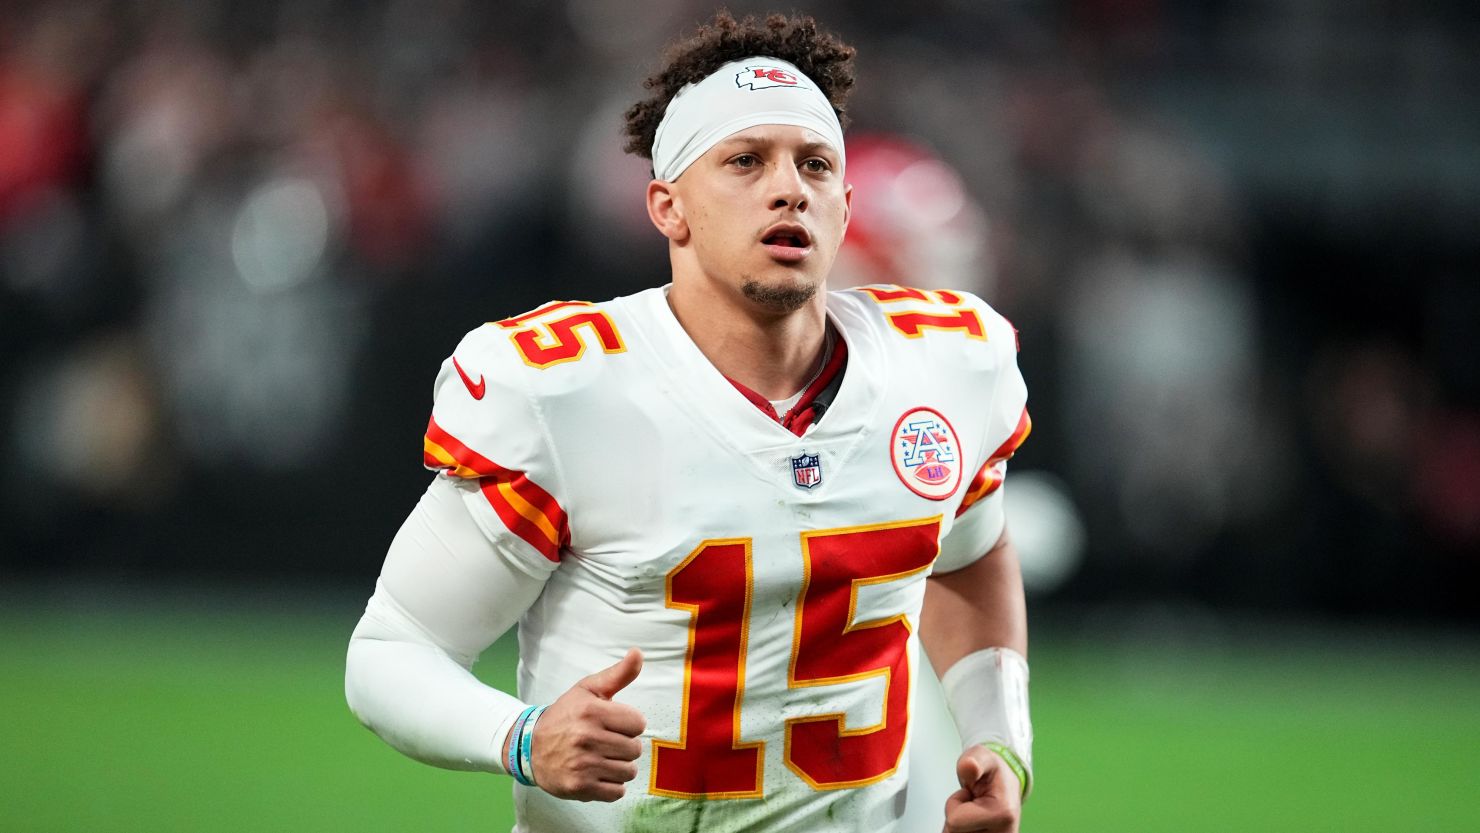 A Family Affair Legal Challenges Shadow Over Chiefs' Mahomes Dynasty